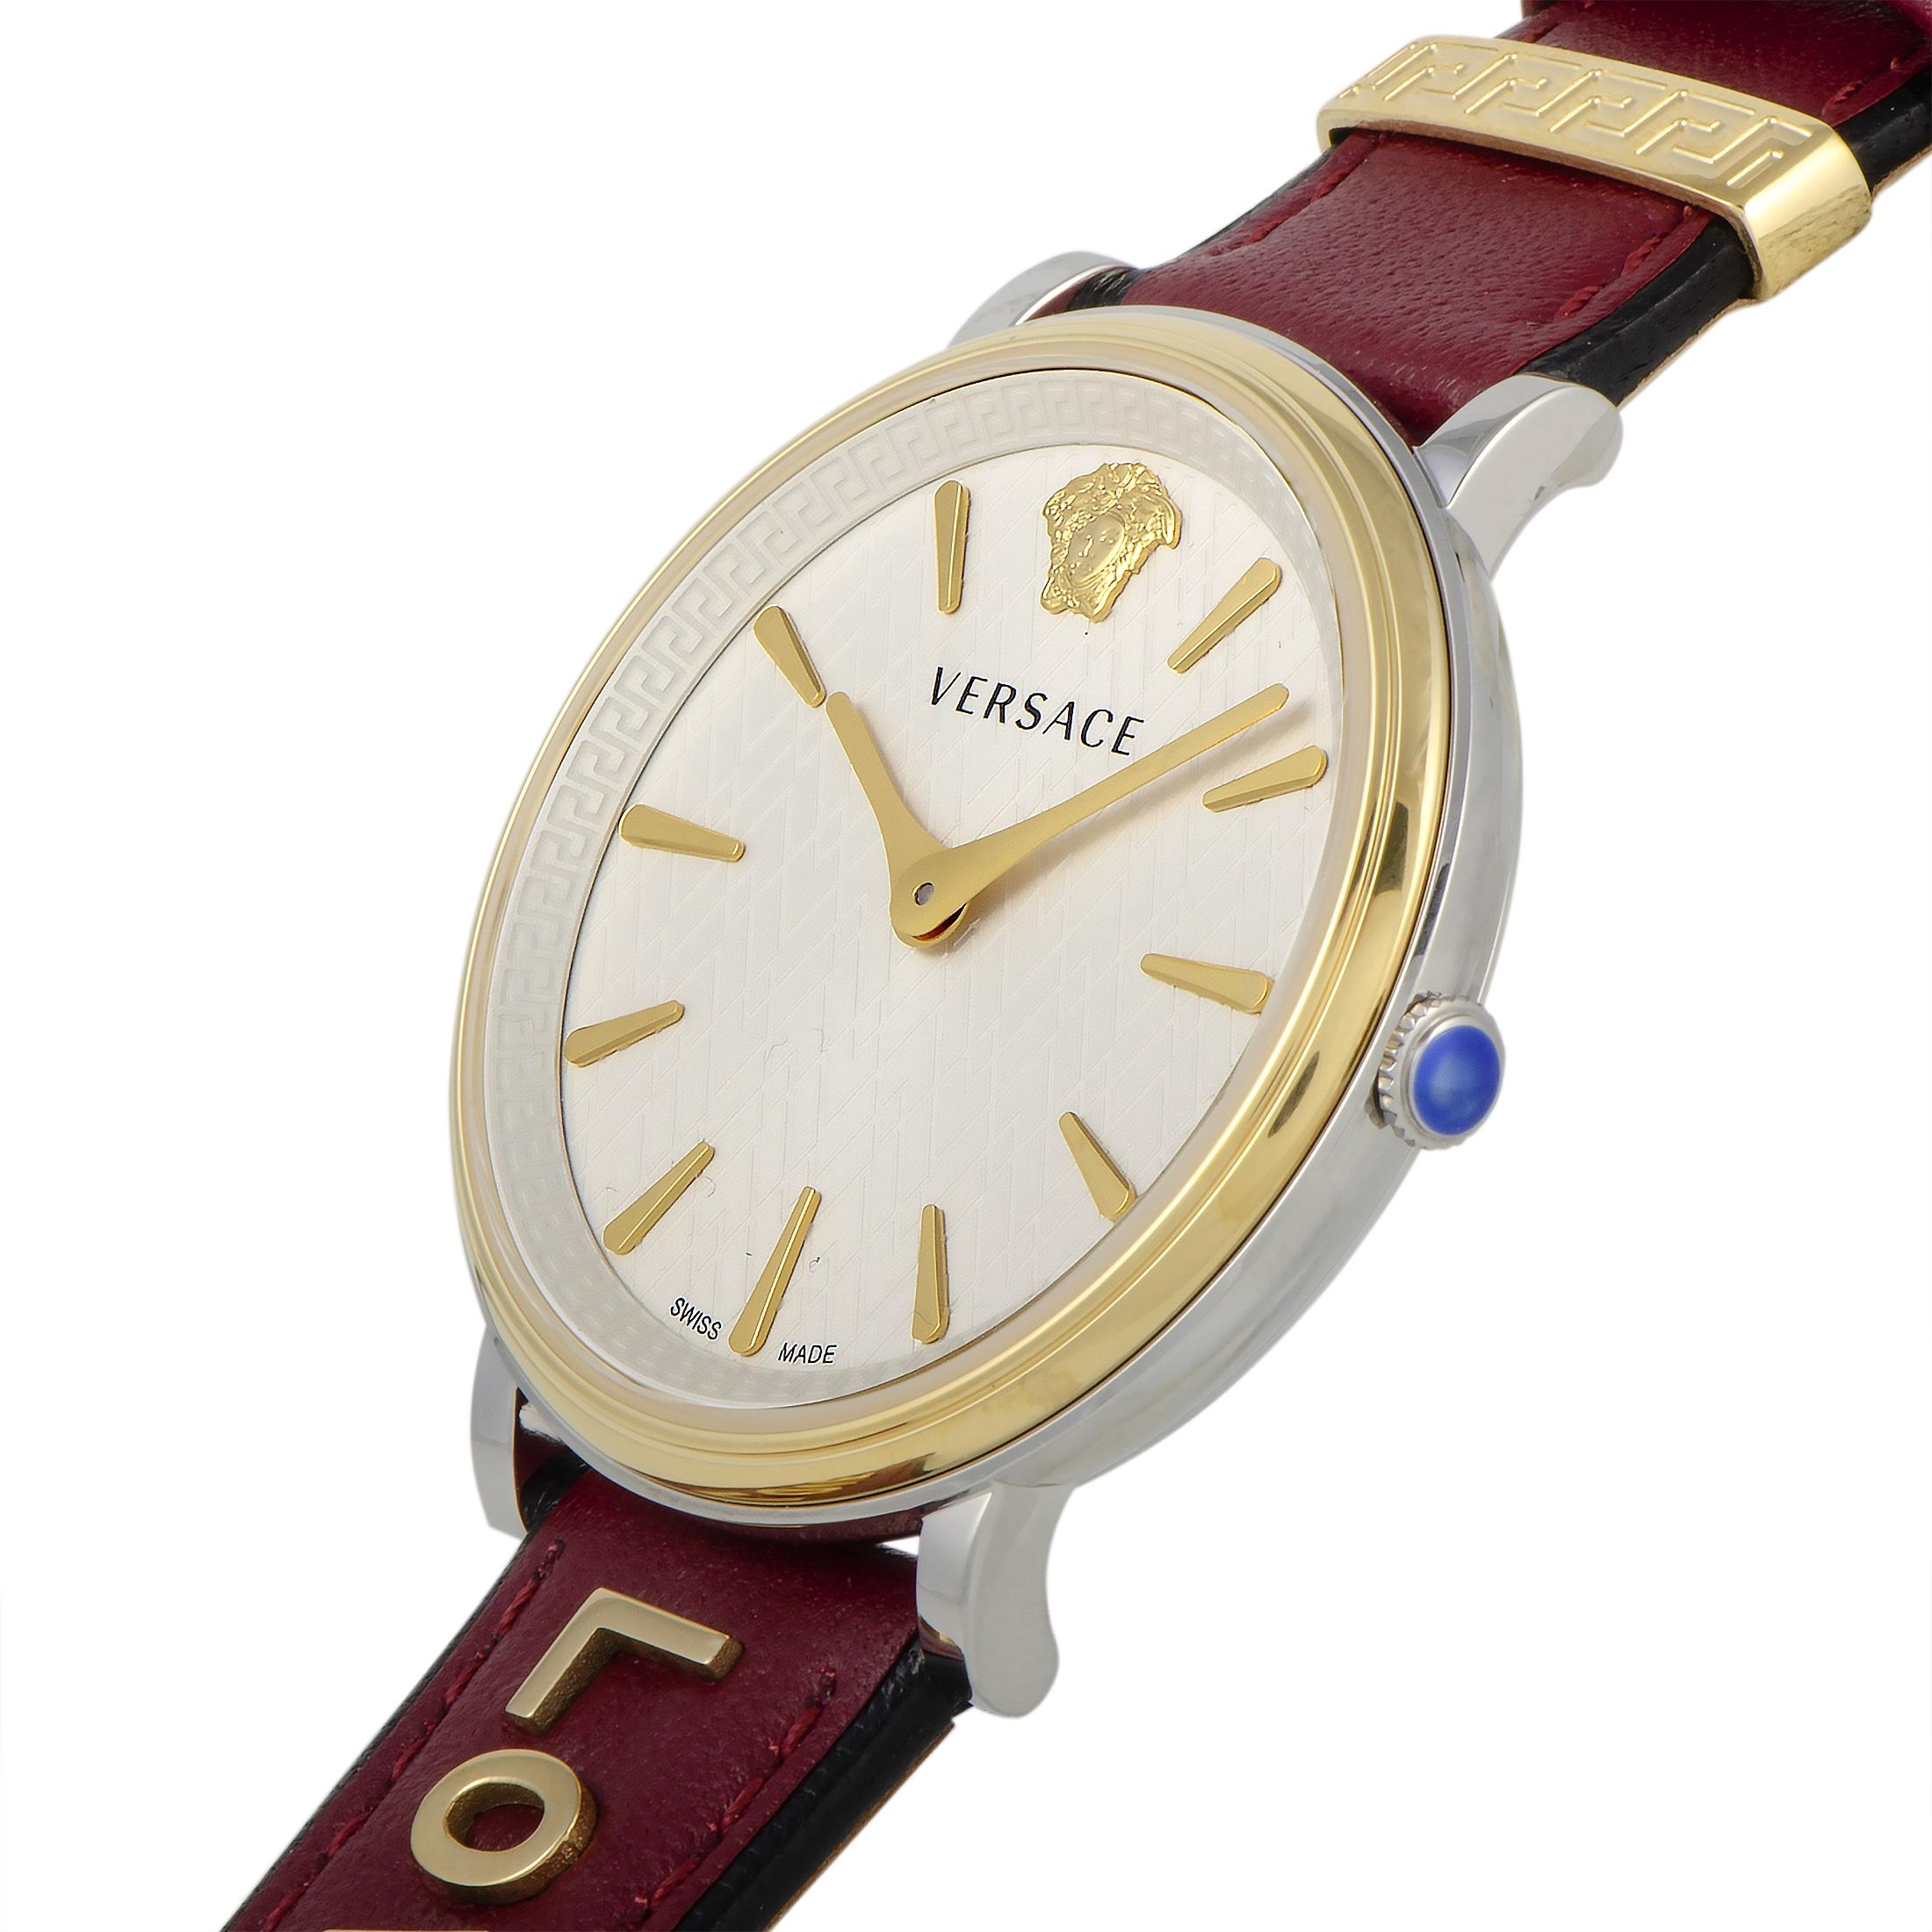 The Versace V-Circle watch, reference number VBP020017, comes with a 38 mm stainless steel case that offers water resistance of 50 meters. The case is presented on a burgundy leather strap fitted with a tang buckle. The watch is powered by a quartz